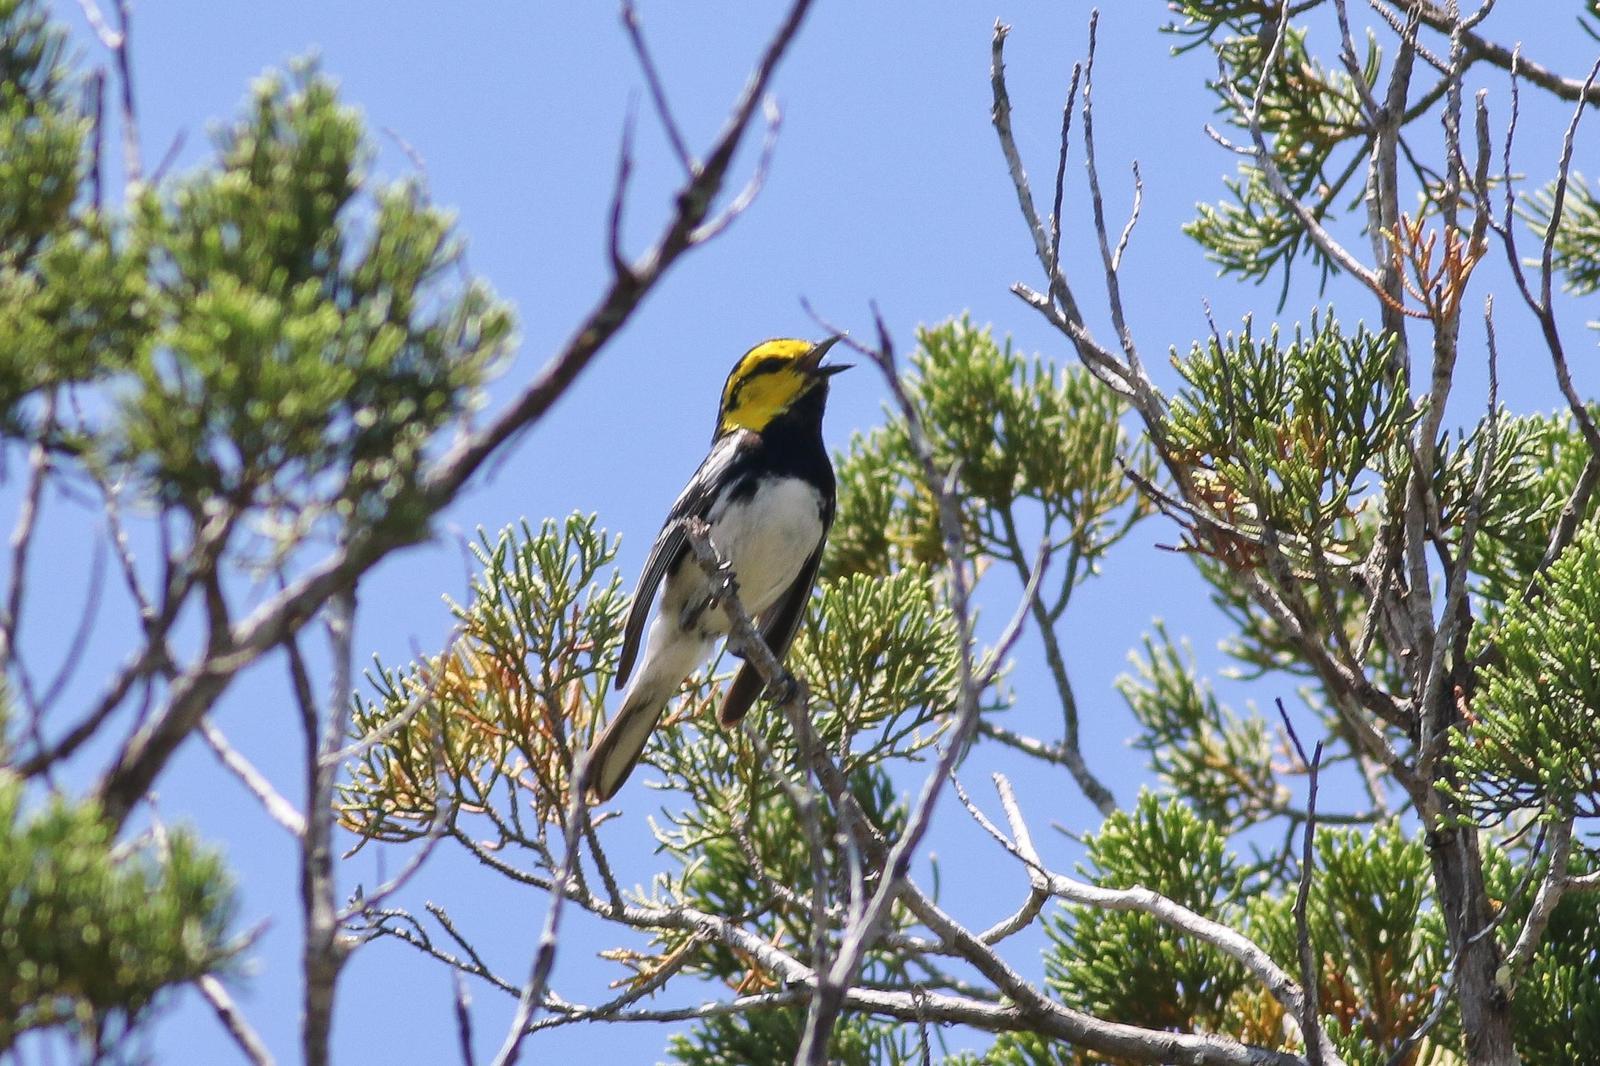 Golden-cheeked Warbler Photo by Tom Ford-Hutchinson